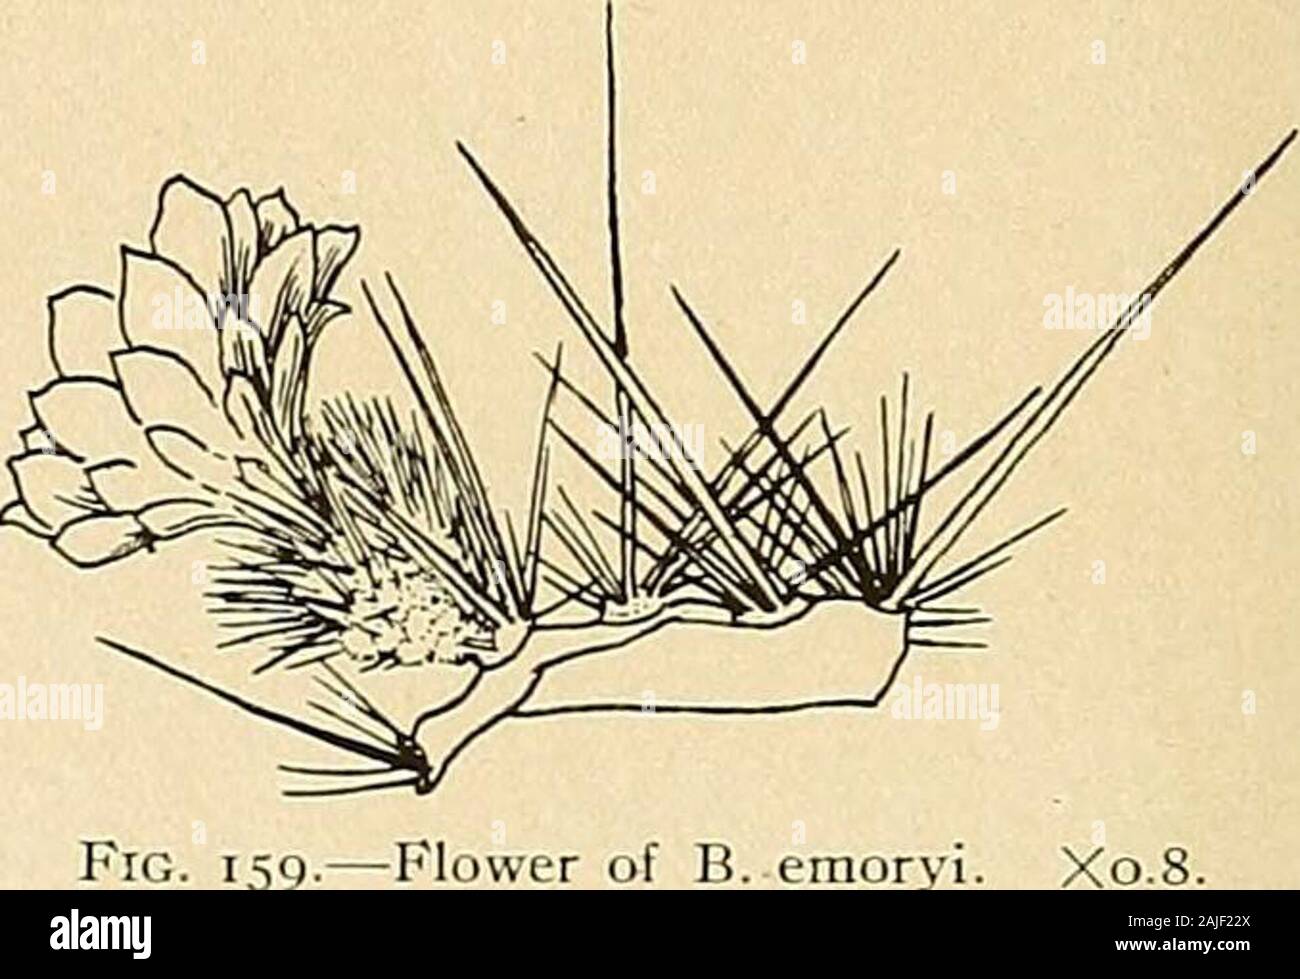 The Cactaceae : descriptions and illustrations of plants of the cactus family . Fig. 158.—Bergerocactus emory io8 THE CACTACEAE.. Fig. 159.—Flower of B. emoryi The genus is monotypic; it is named in honor of Alwin Berger, author of an excellentdiscussion of the genus Cereus, who was long in charge of the garden of Sir Thomas Hanburyat La Mortola, Italy. 1. Bergerocactus emoryi (Engelmann) Britton and Rose, Contr. U. S. Nat. Herb. 12:435,* 474.1909. Cereus emoryi Engelmann, Amer. Journ. Sci. II. 14: 338. 1852.Echinocereus emoryi Riimpler in Forster, Handb. Cad:, ed. 2. 804. 1885. Branches 2 to Stock Photo